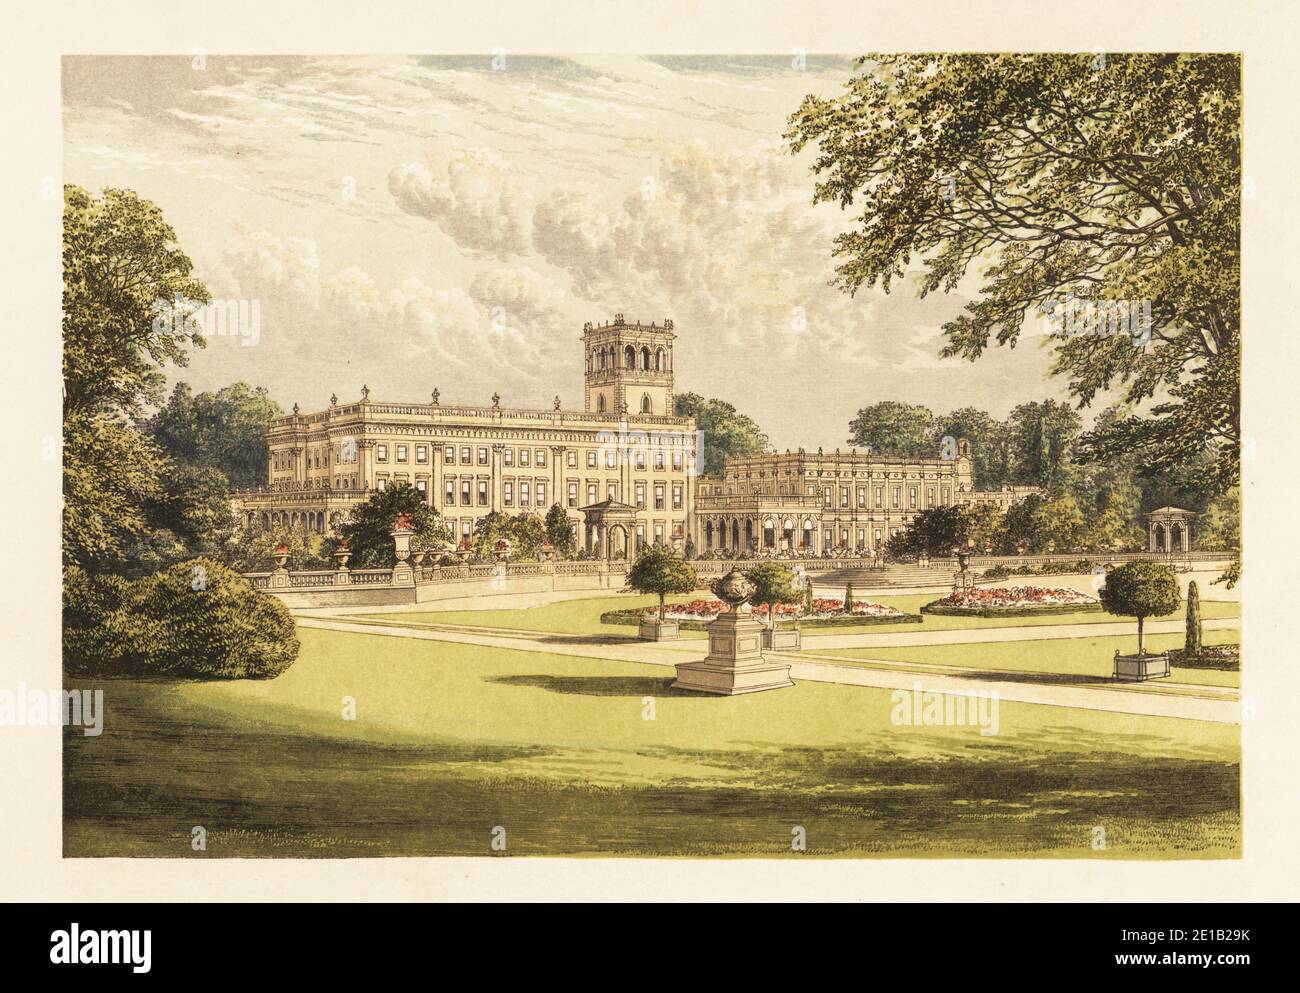 Trentham Hall, Staffordshire, England. Italianate house designed by Charles Barry built from 1833 to 1842 in park grounds landscaped by Lancelot Capability Brown in the 18th century. Colour woodblock by Benjamin Fawcett in the Baxter process of an illustration by Alexander Francis Lydon from Reverend Francis Orpen Morris’s Picturesque Views of the Seats of Noblemen and Gentlemen of Great Britain and Ireland, William Mackenzie, London, 1880. Stock Photo